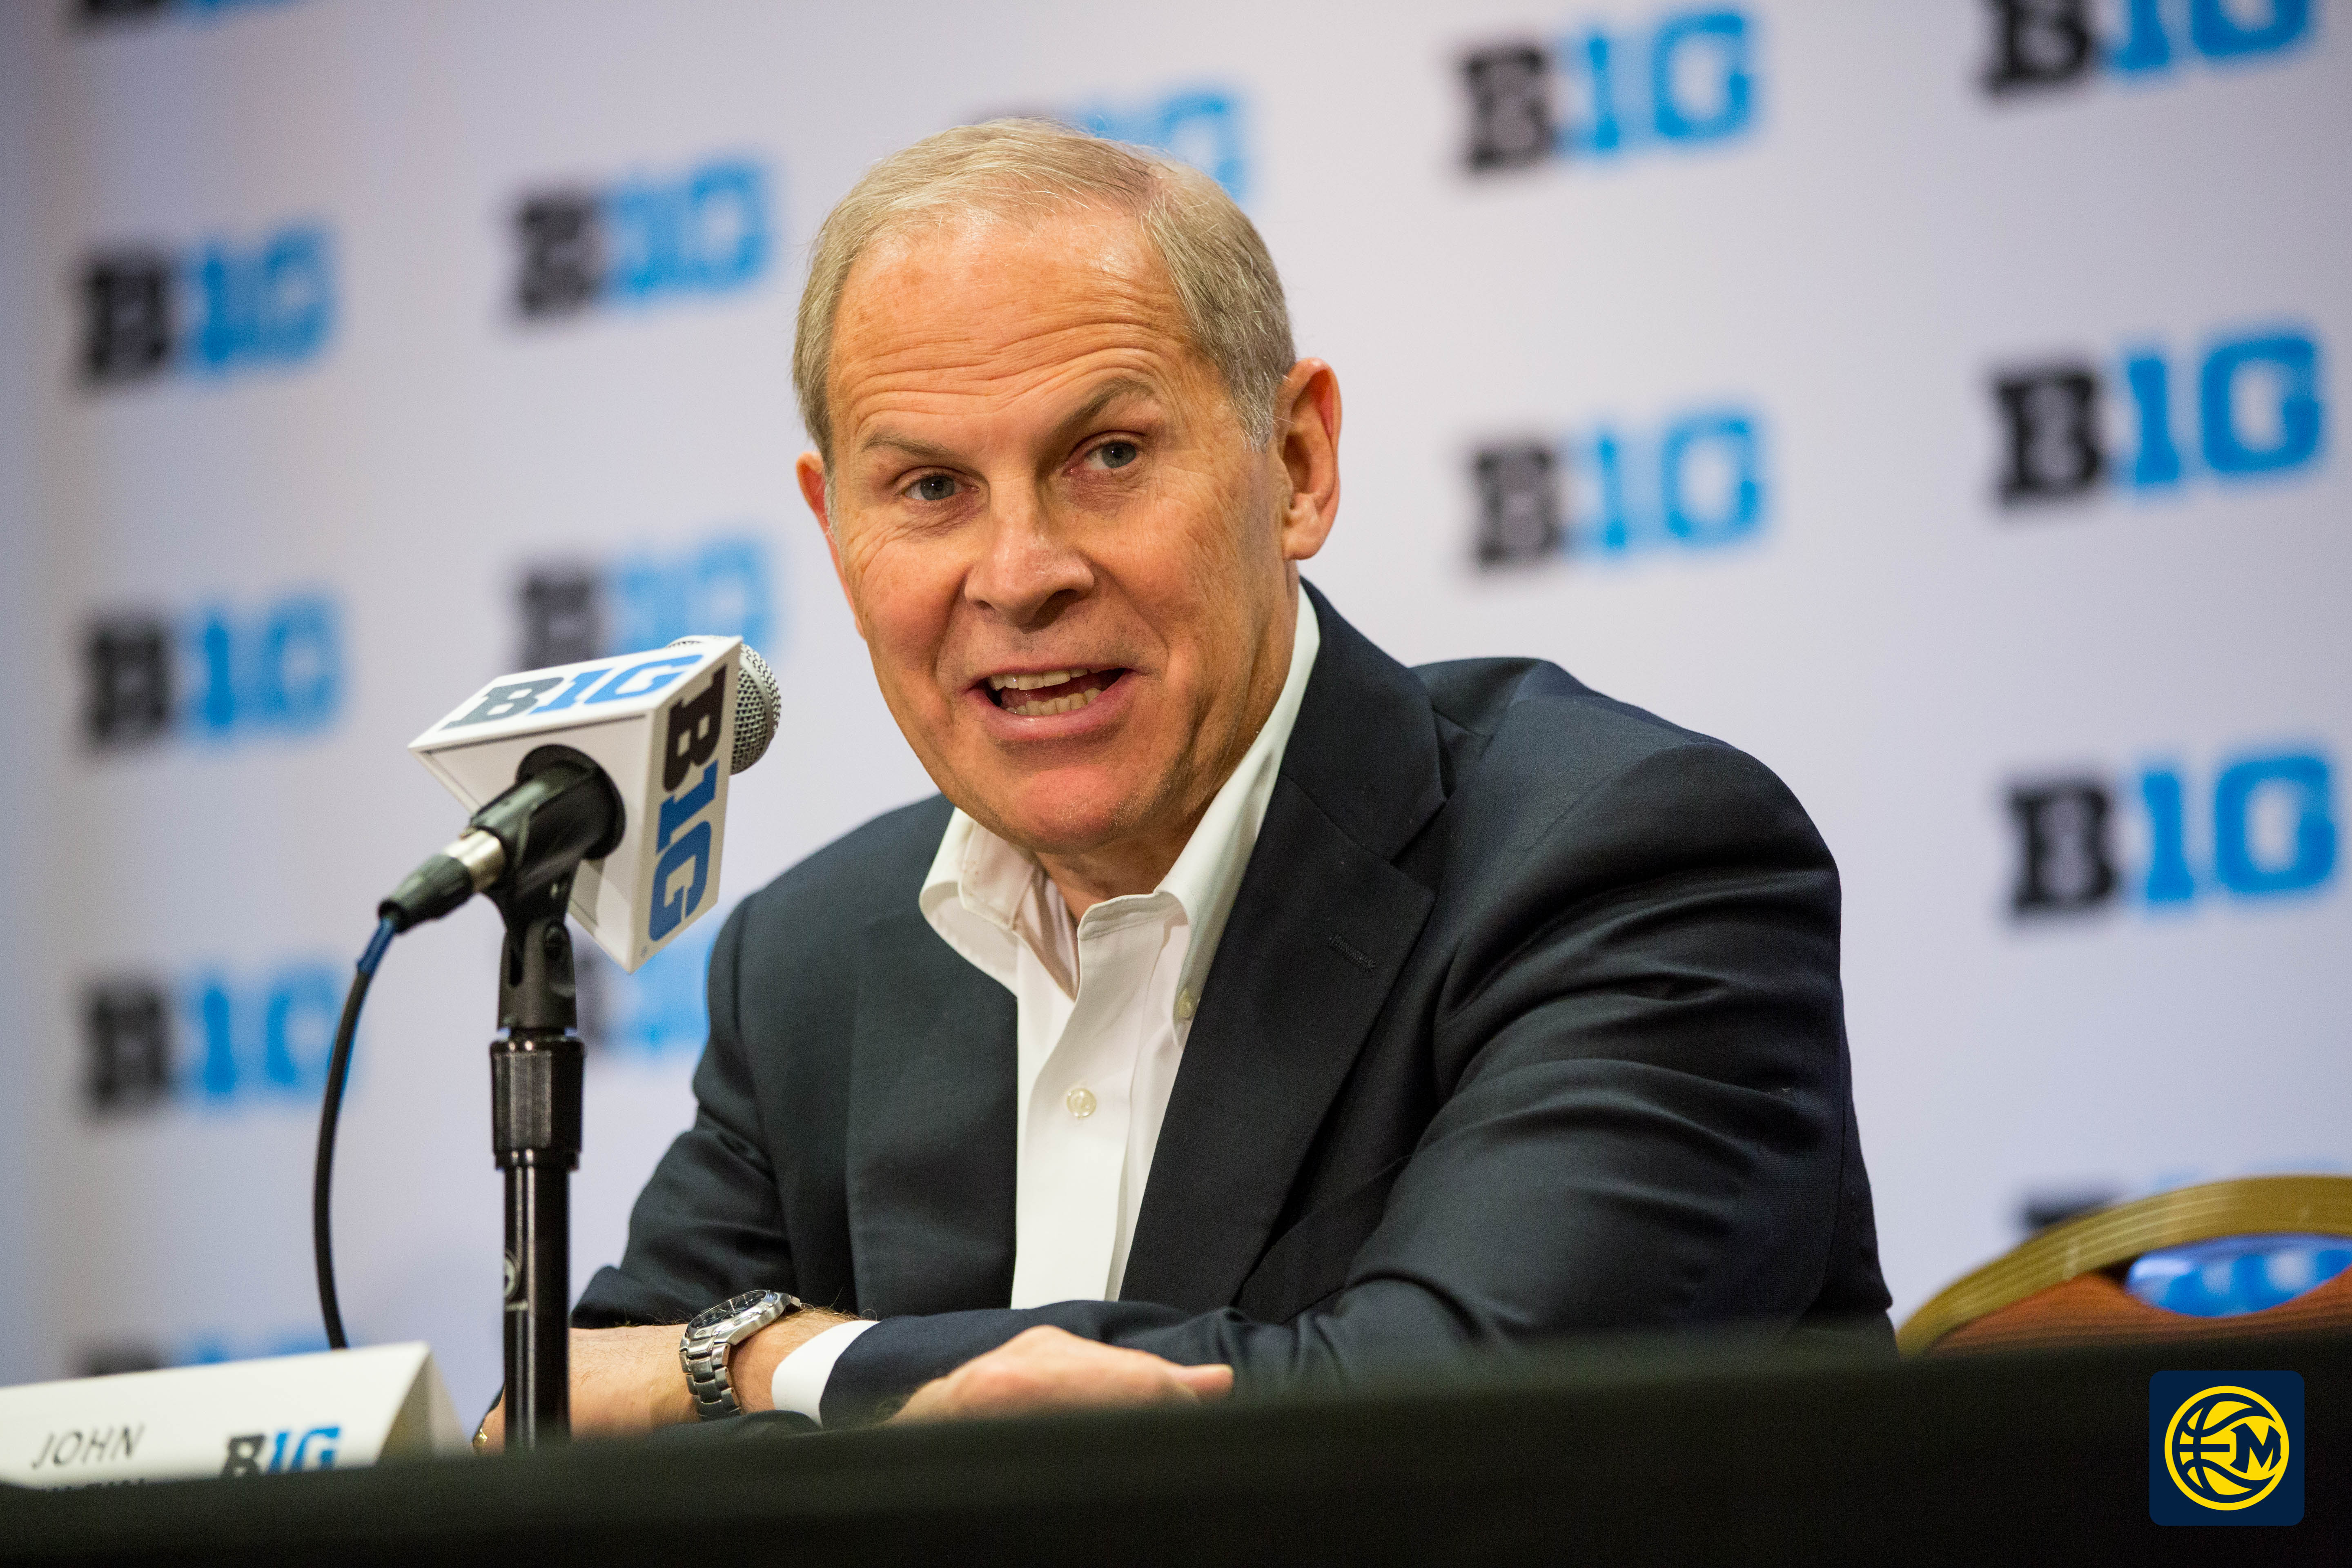 Photo Courtesy of Big Ten Conference